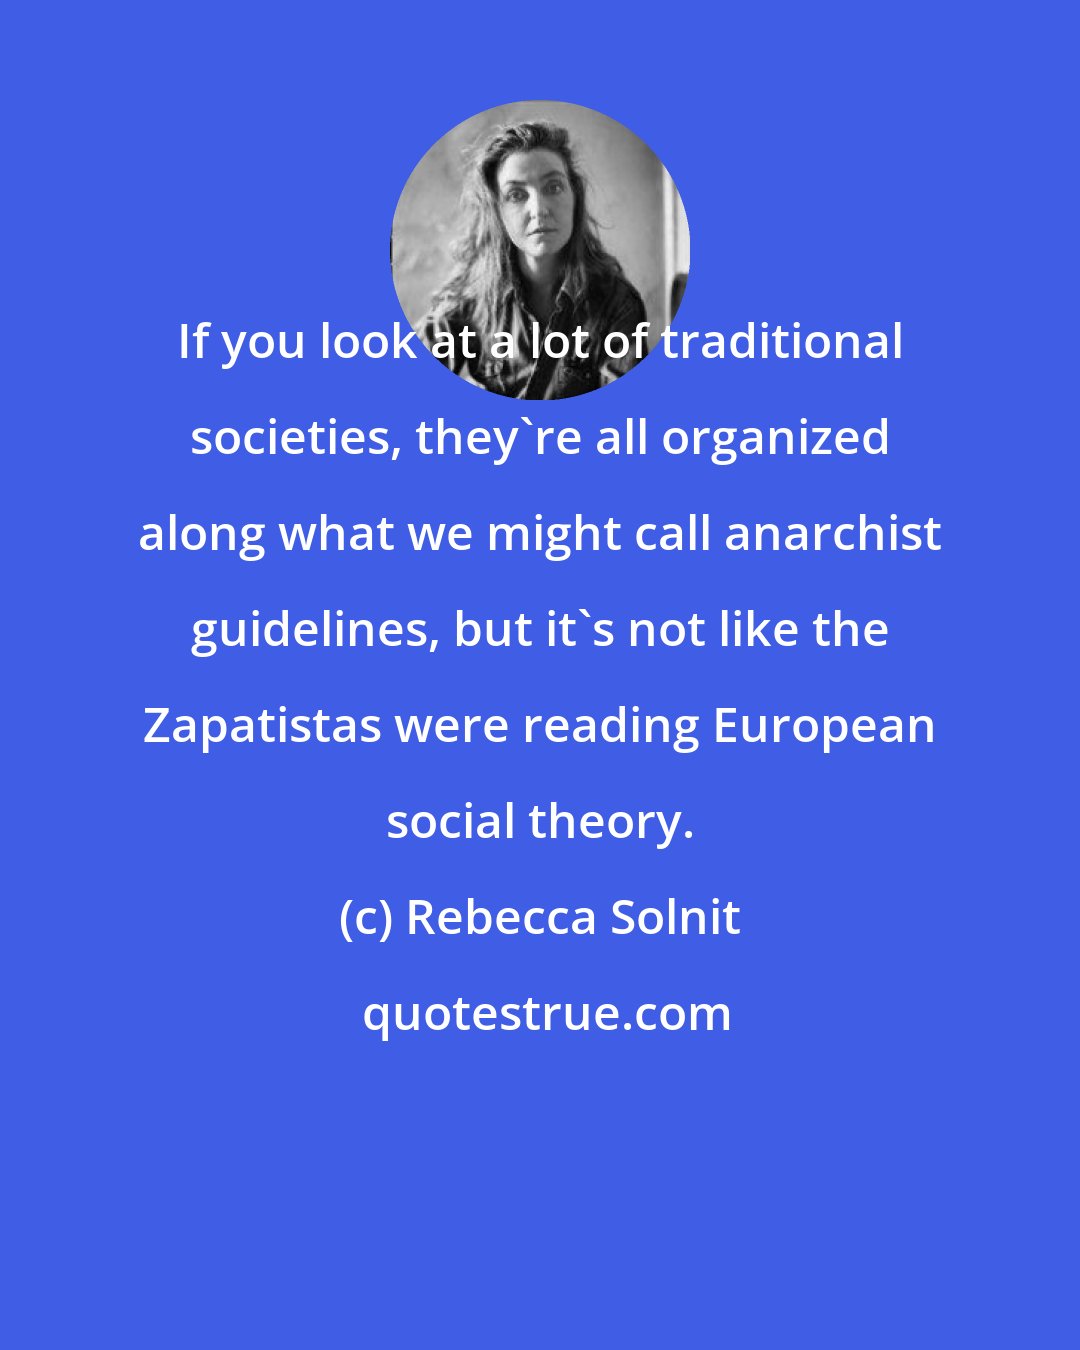 Rebecca Solnit: If you look at a lot of traditional societies, they're all organized along what we might call anarchist guidelines, but it's not like the Zapatistas were reading European social theory.